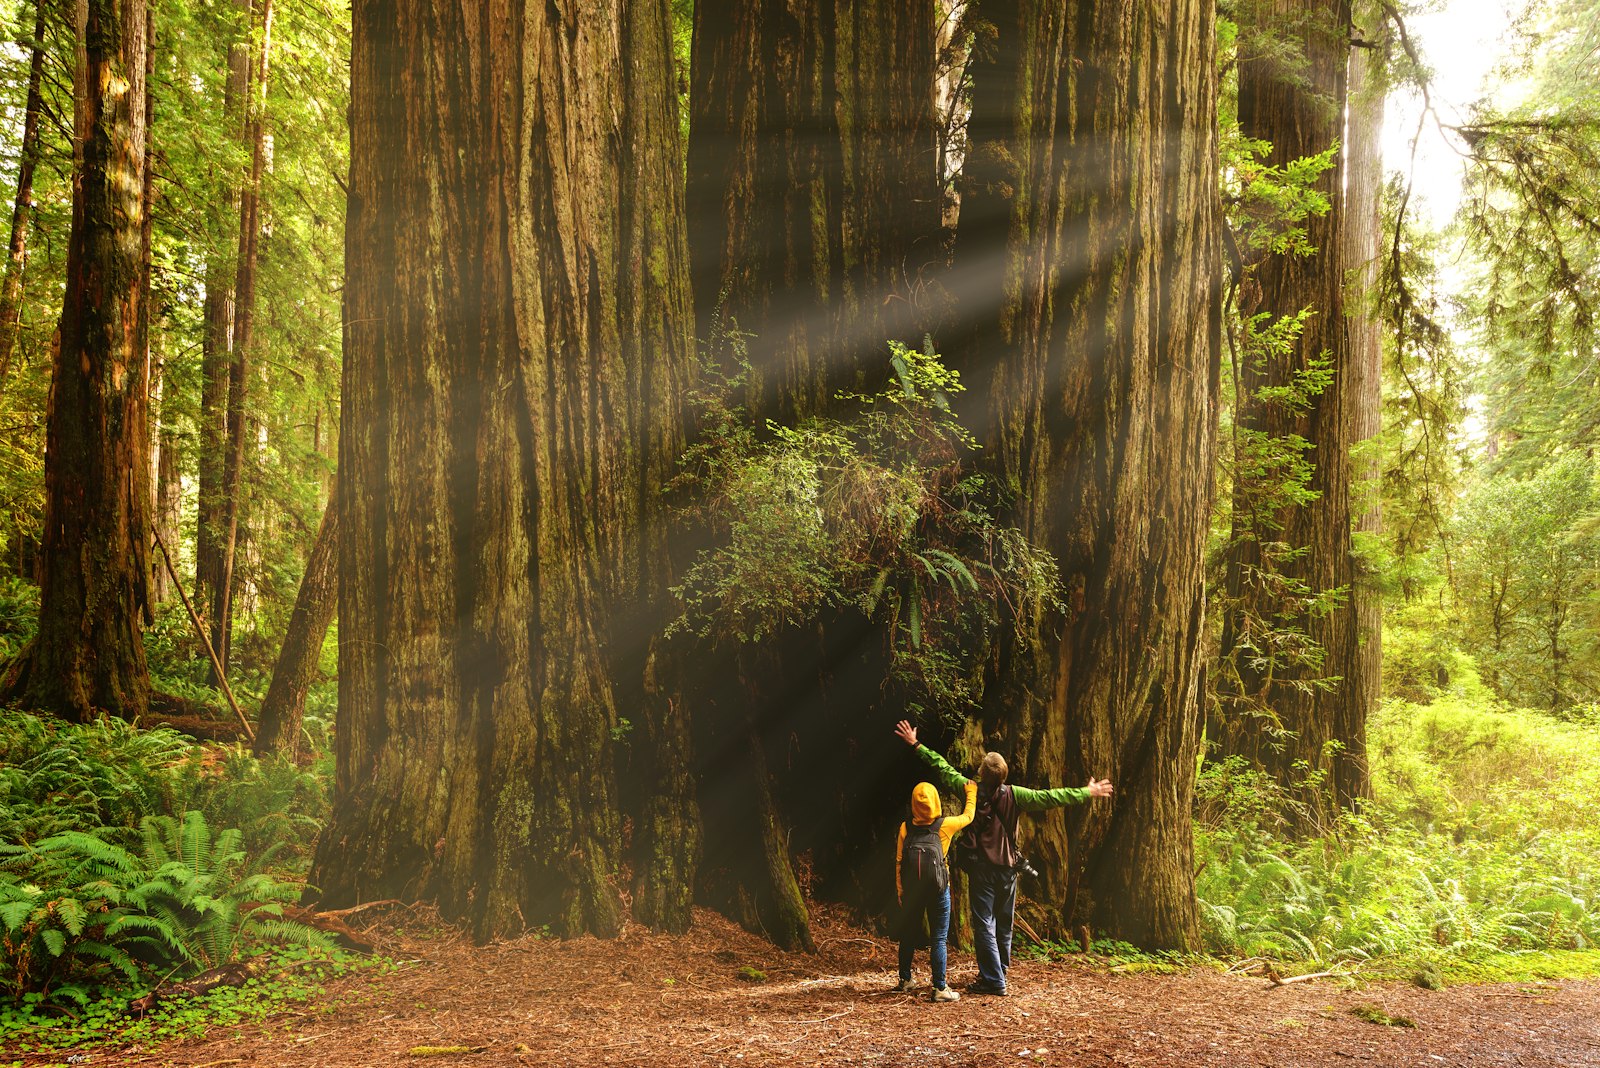 Two kids look up at giant redwood trees. One extends their arms out to the side